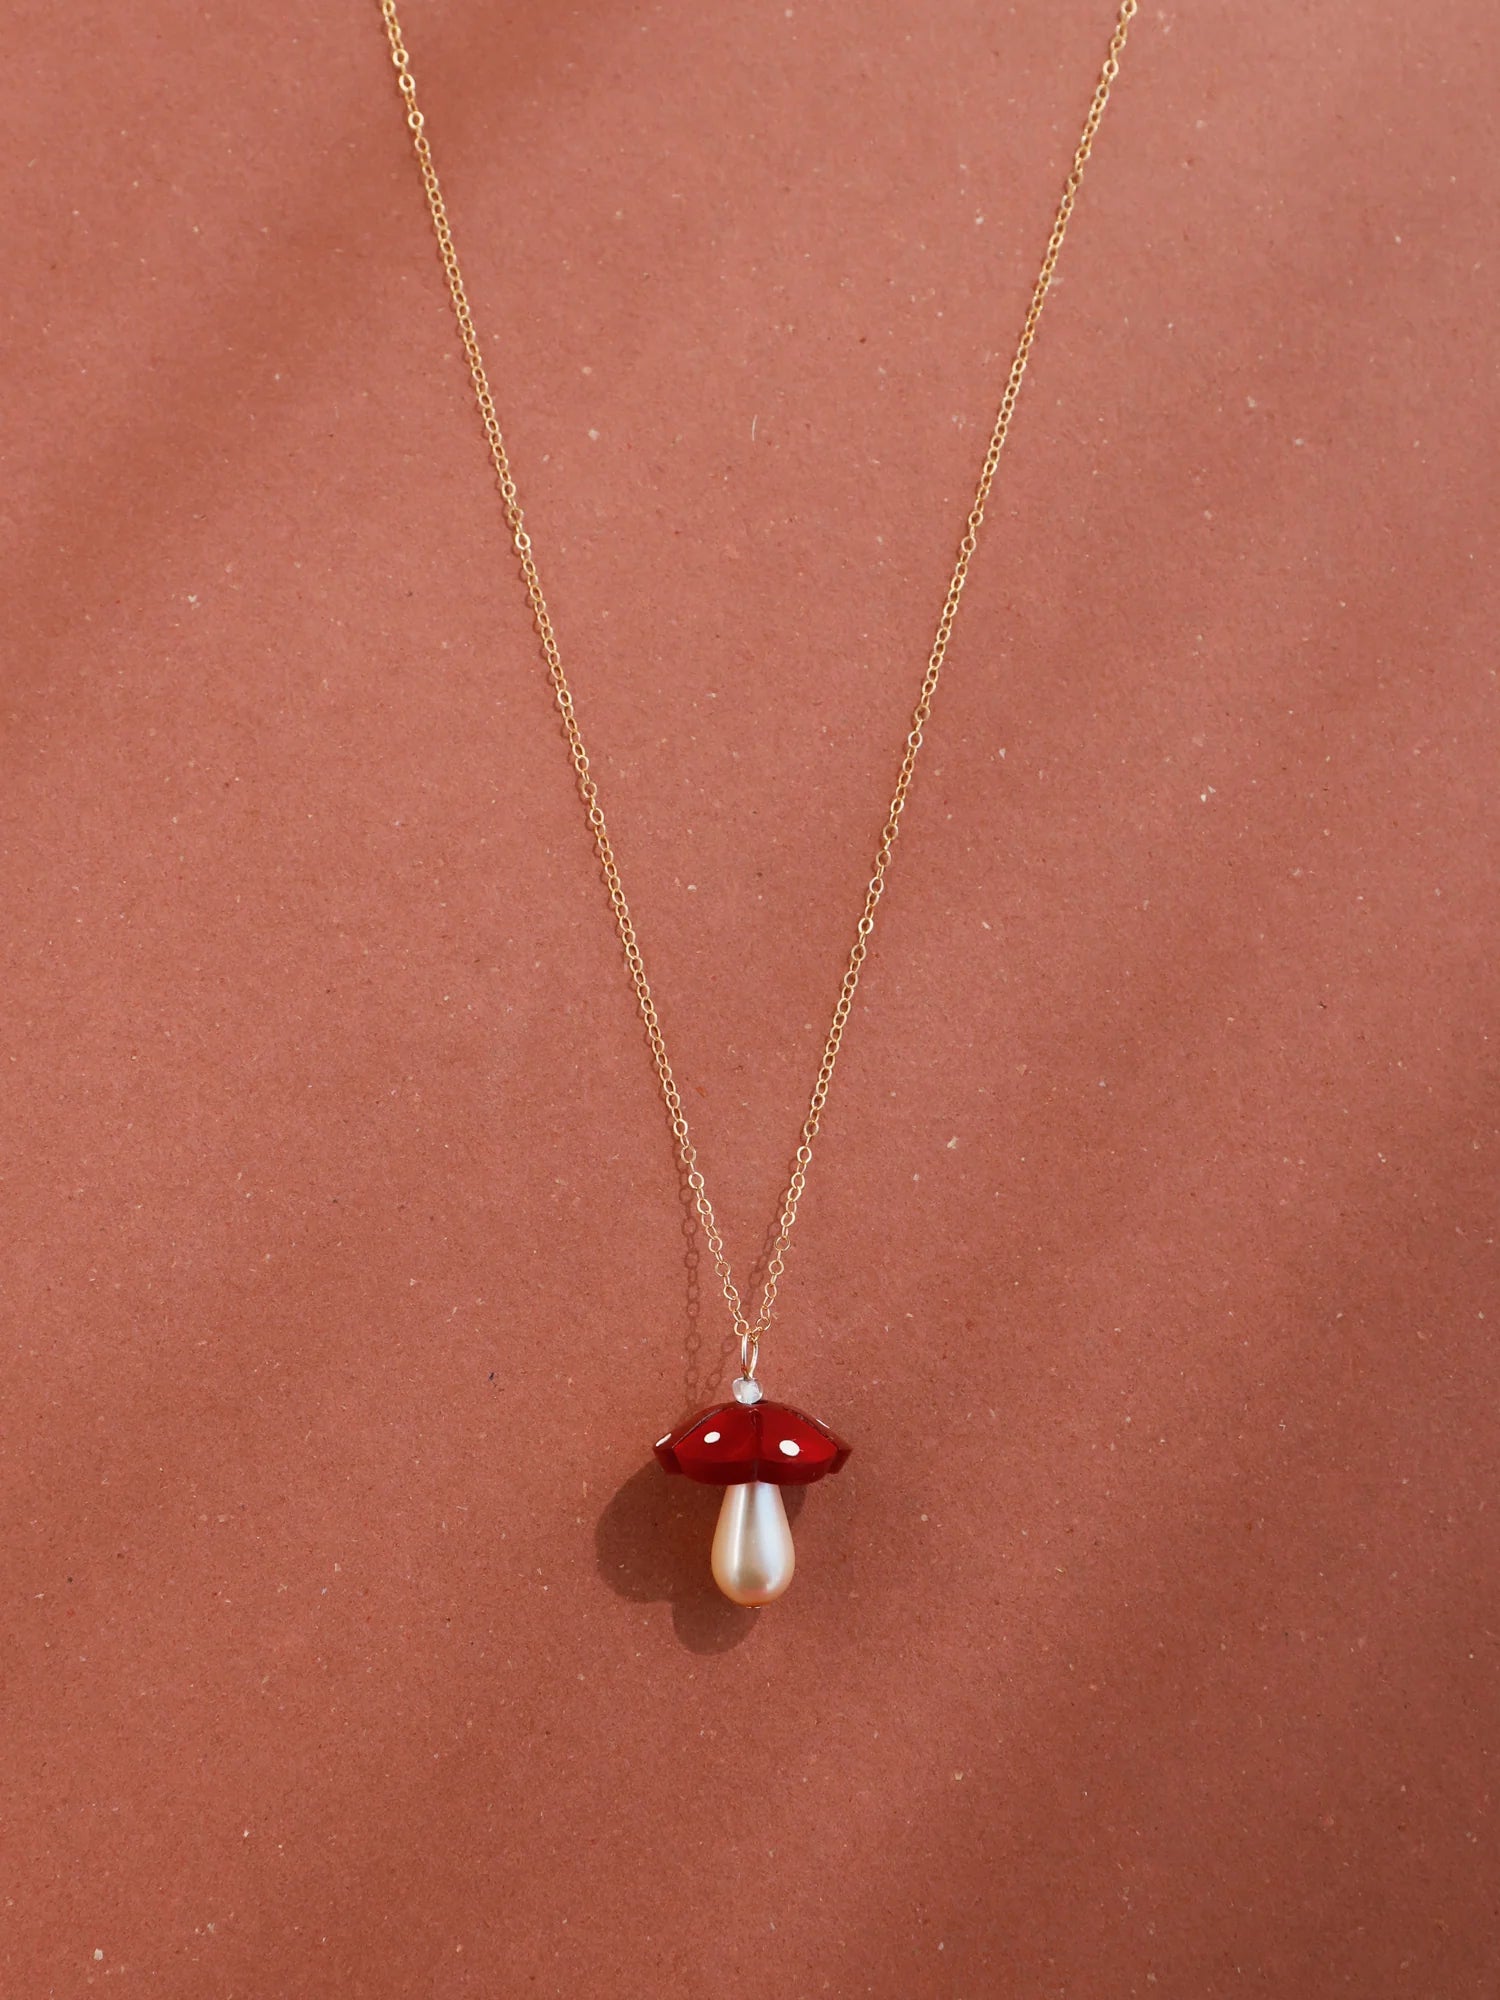 The Every Space Shroom necklace with gold filled chain and red marbled acrylic and glass pearly mushroom pendant by Wolf & Moon